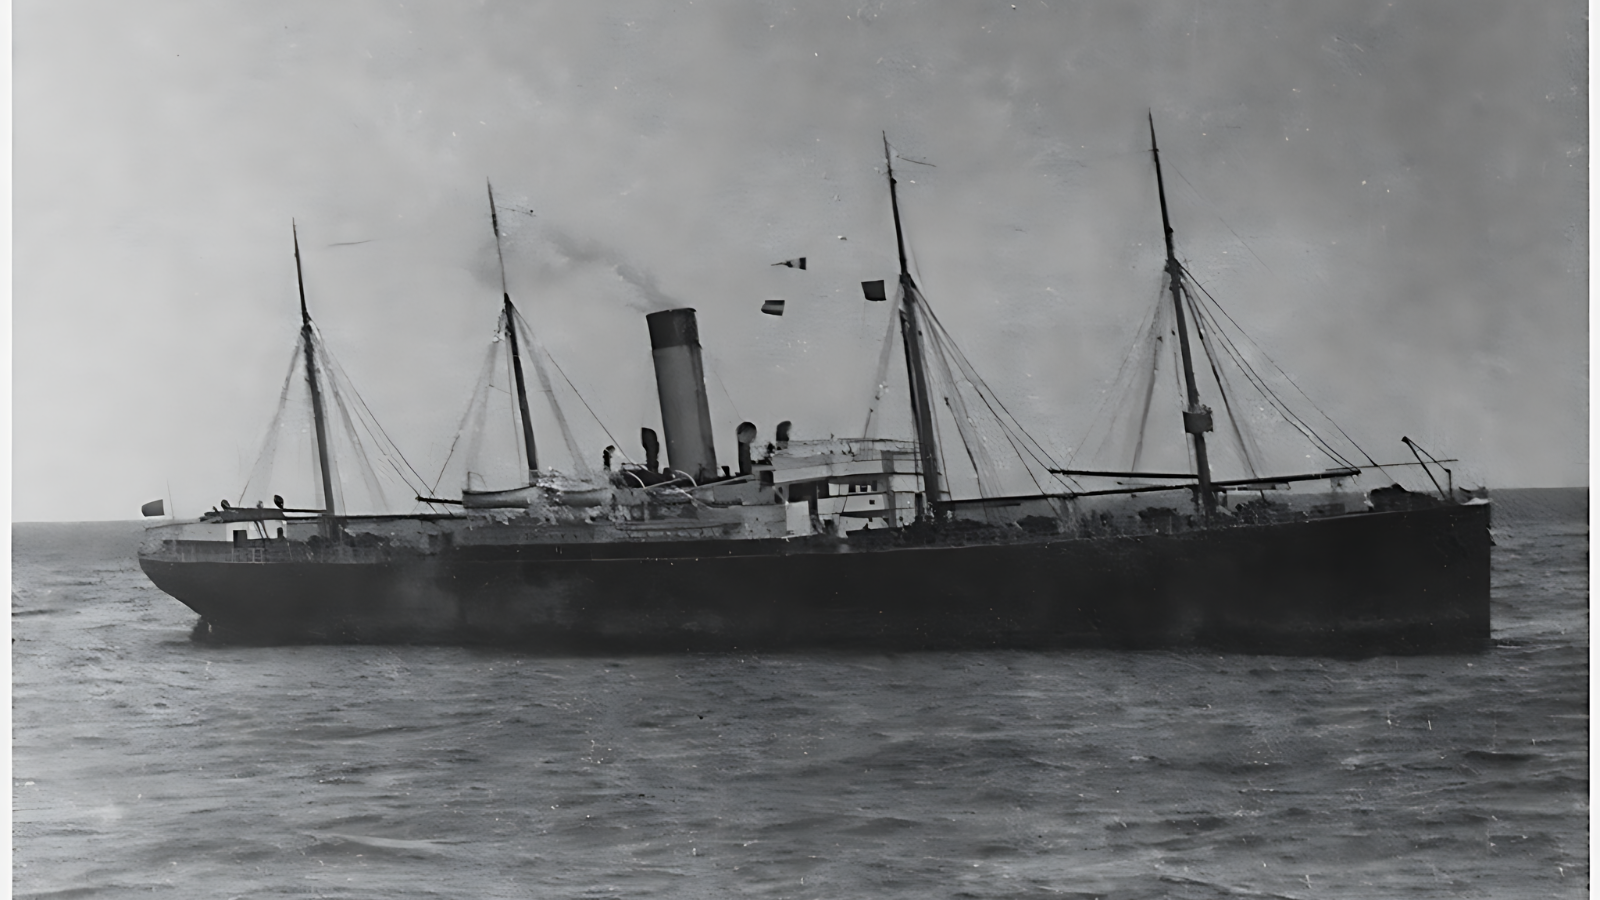 SS Californian, which had tried to warn Titanic of the danger from pack-ice
